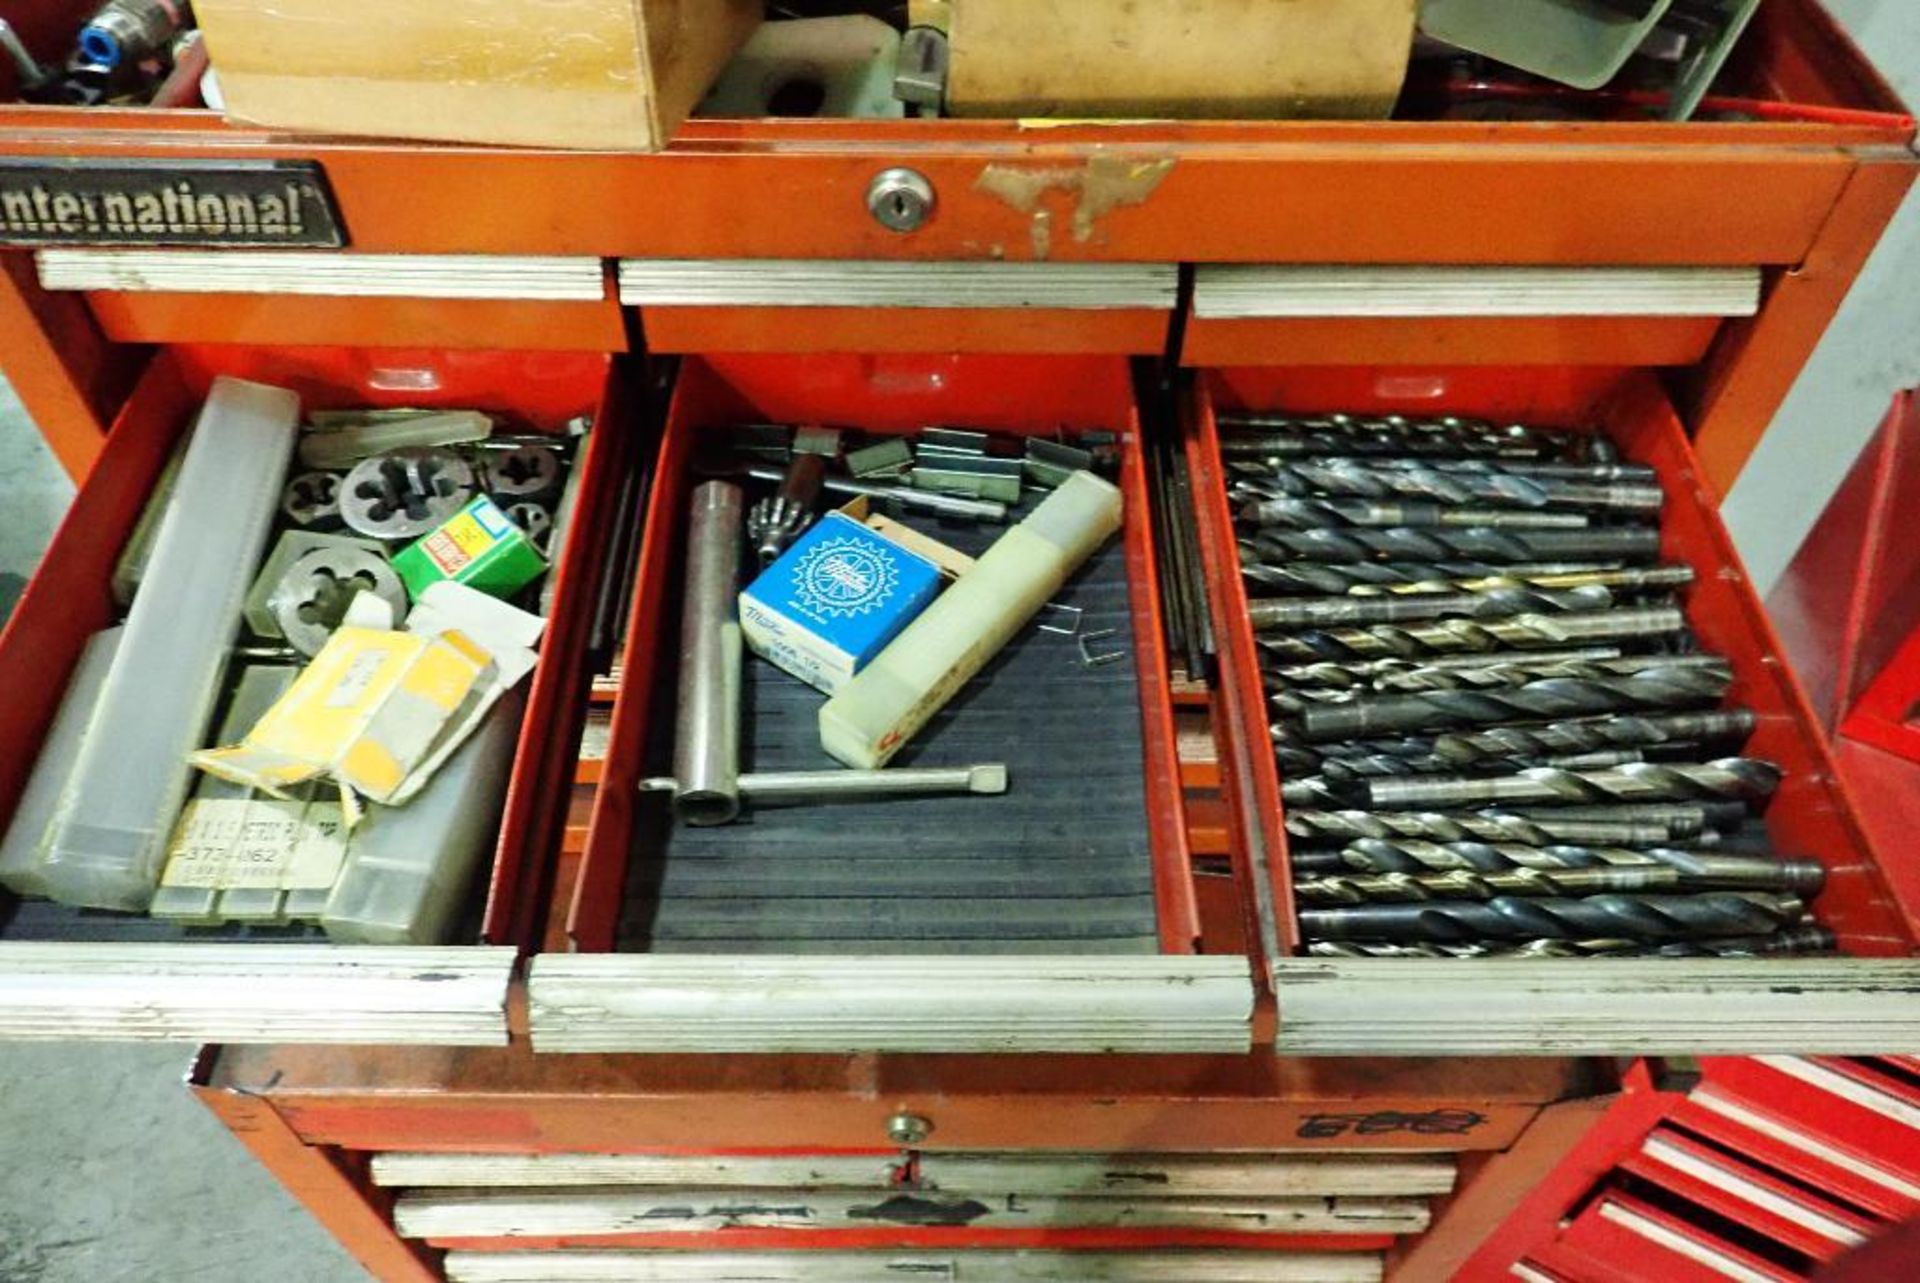 (2) tool chests with contents, wrenches, sockets, drill bits screw drivers, air tools, hammers, plie - Image 19 of 31